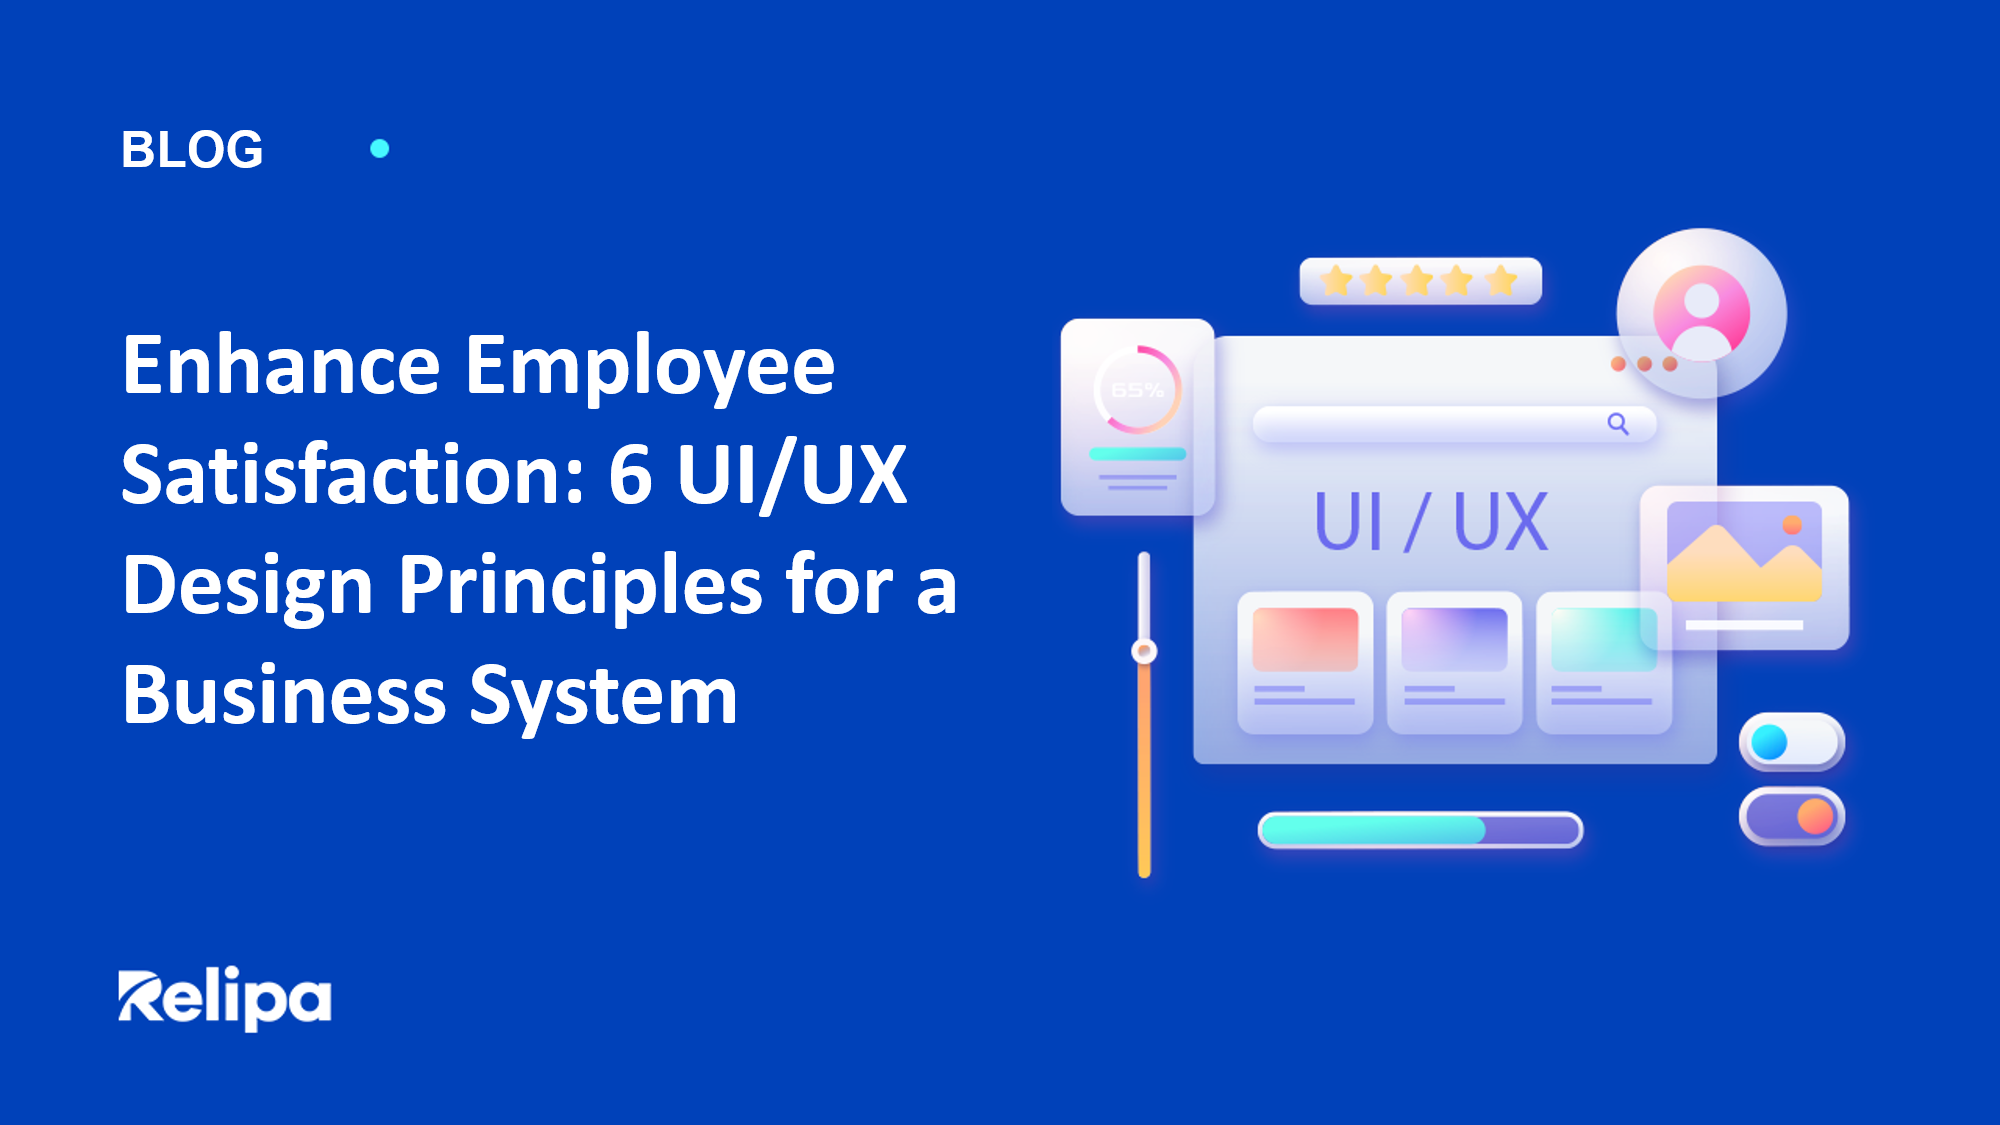 Enhance Employee Satisfaction: 6 UI/UX Design Principles for a Business System